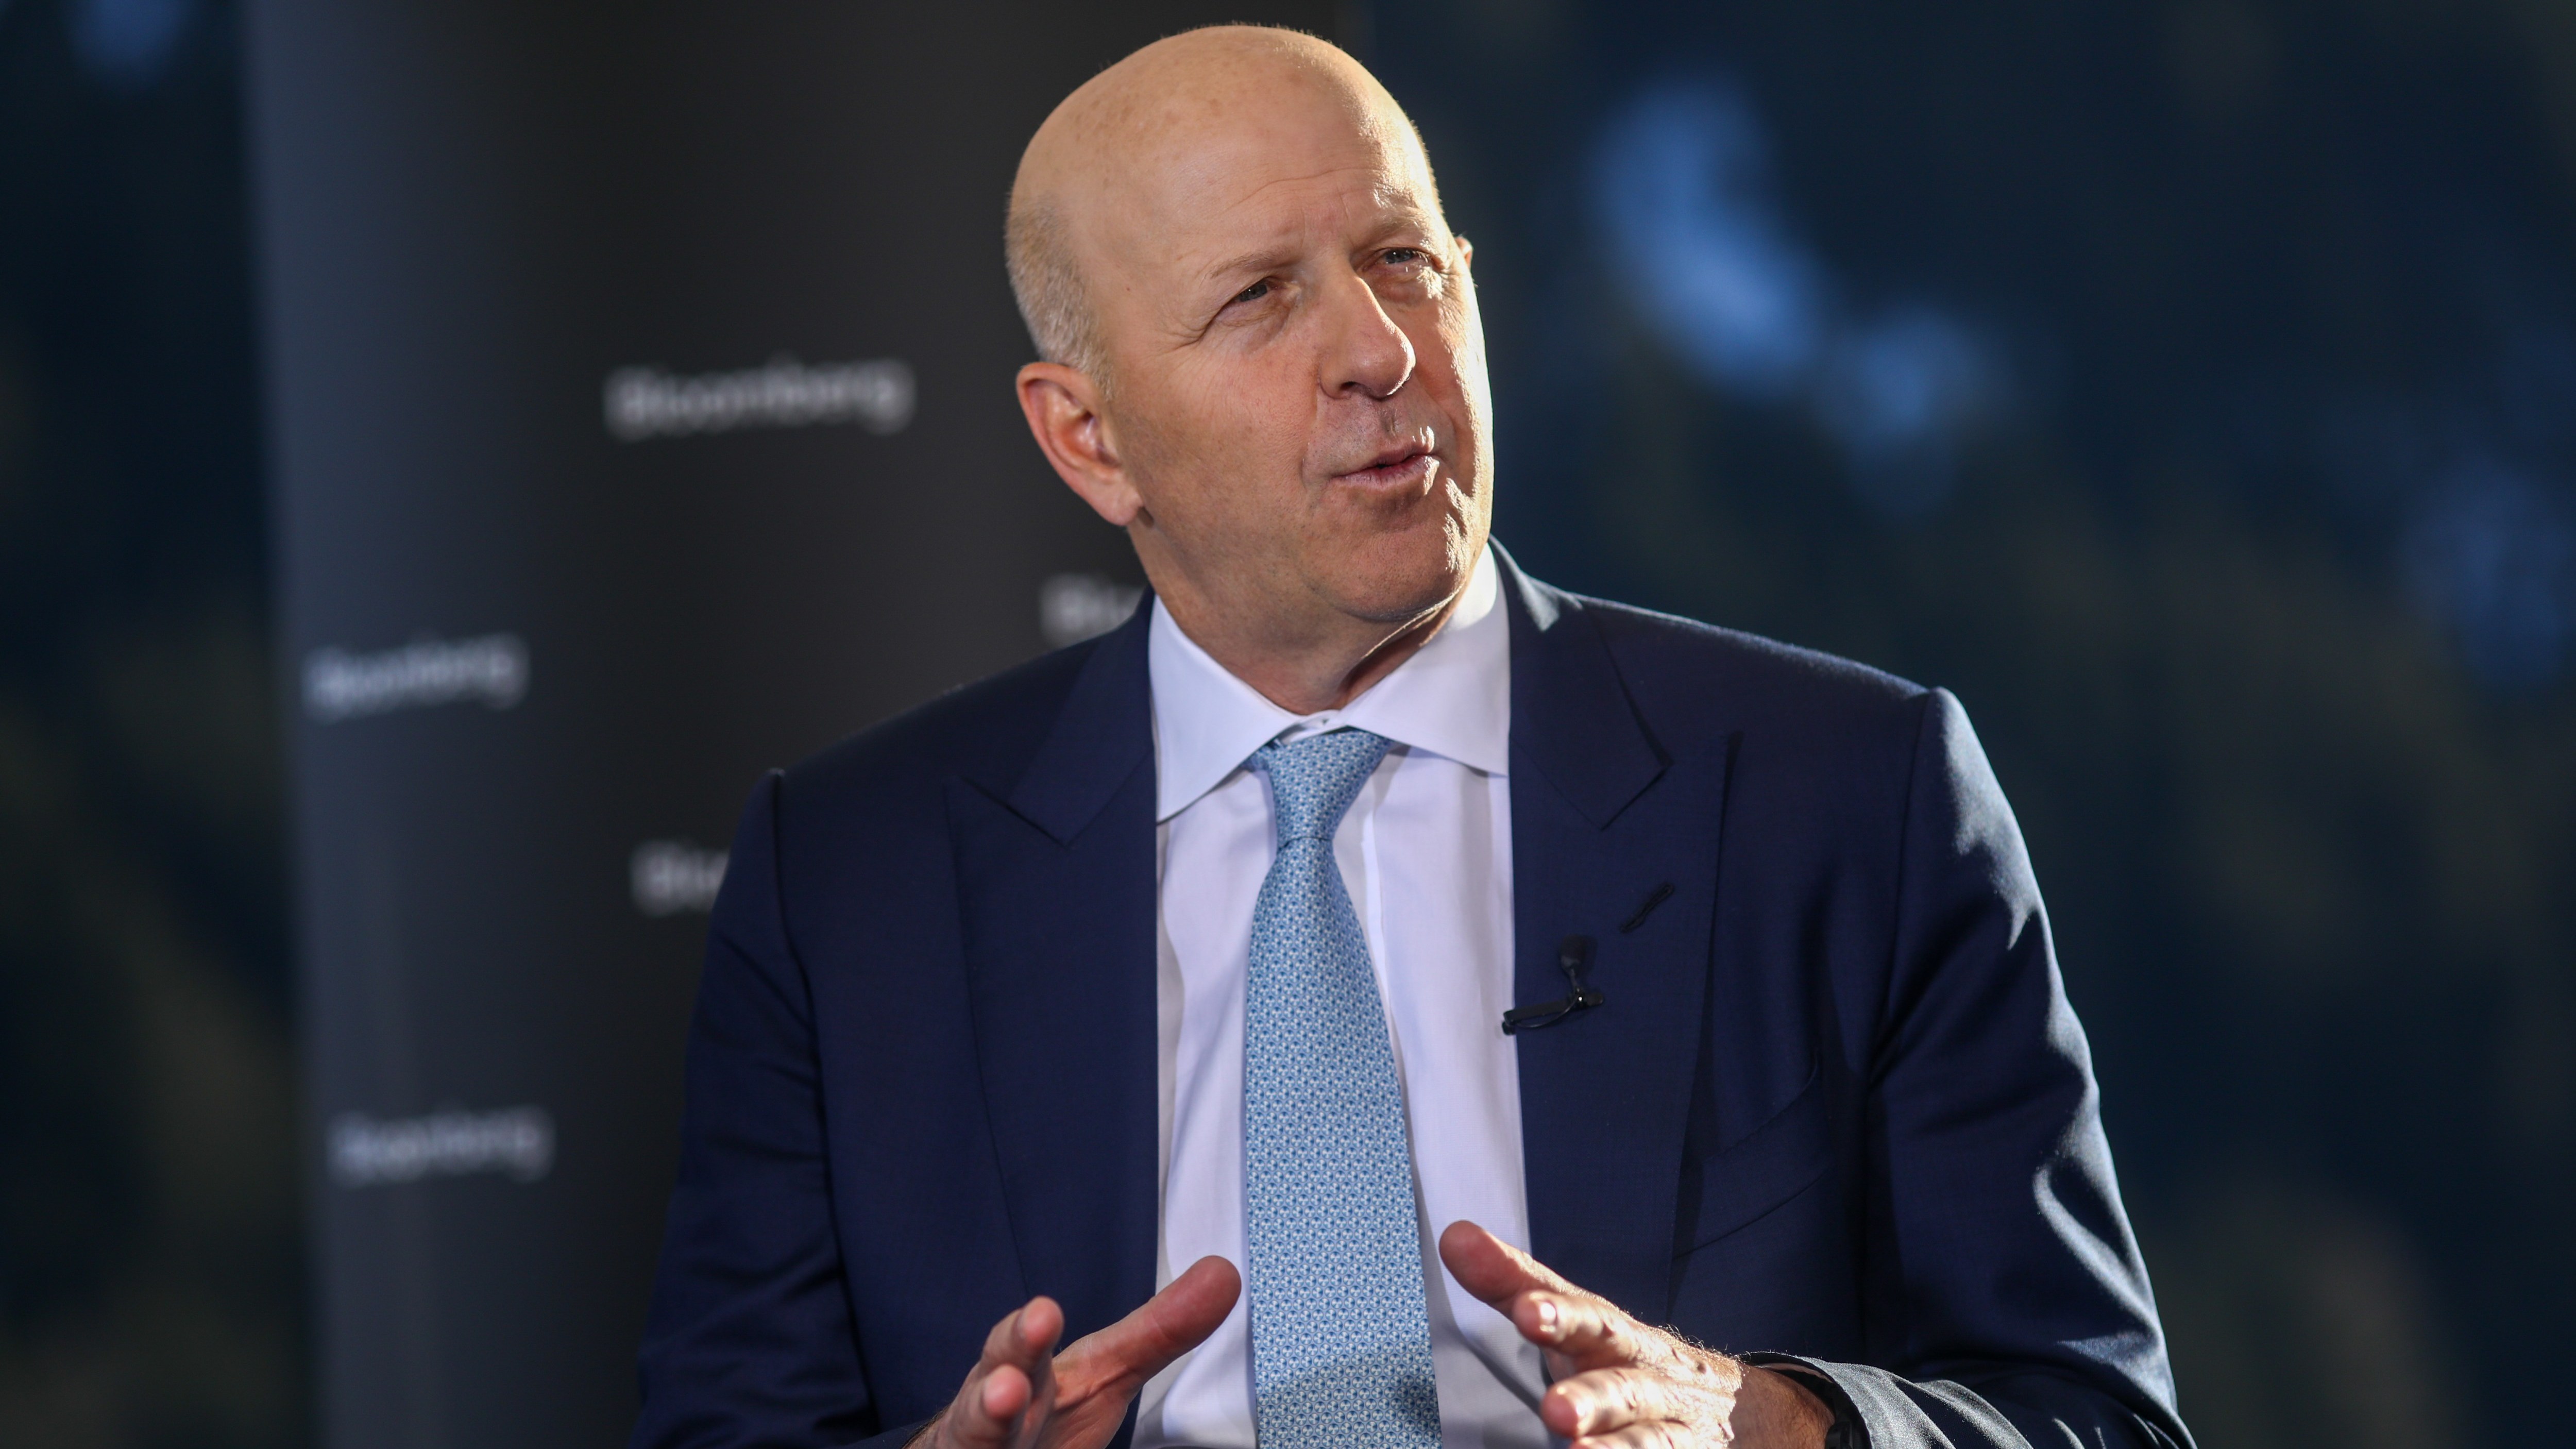 Surprise jump in profits at Goldman Sachs as deal-making recovers